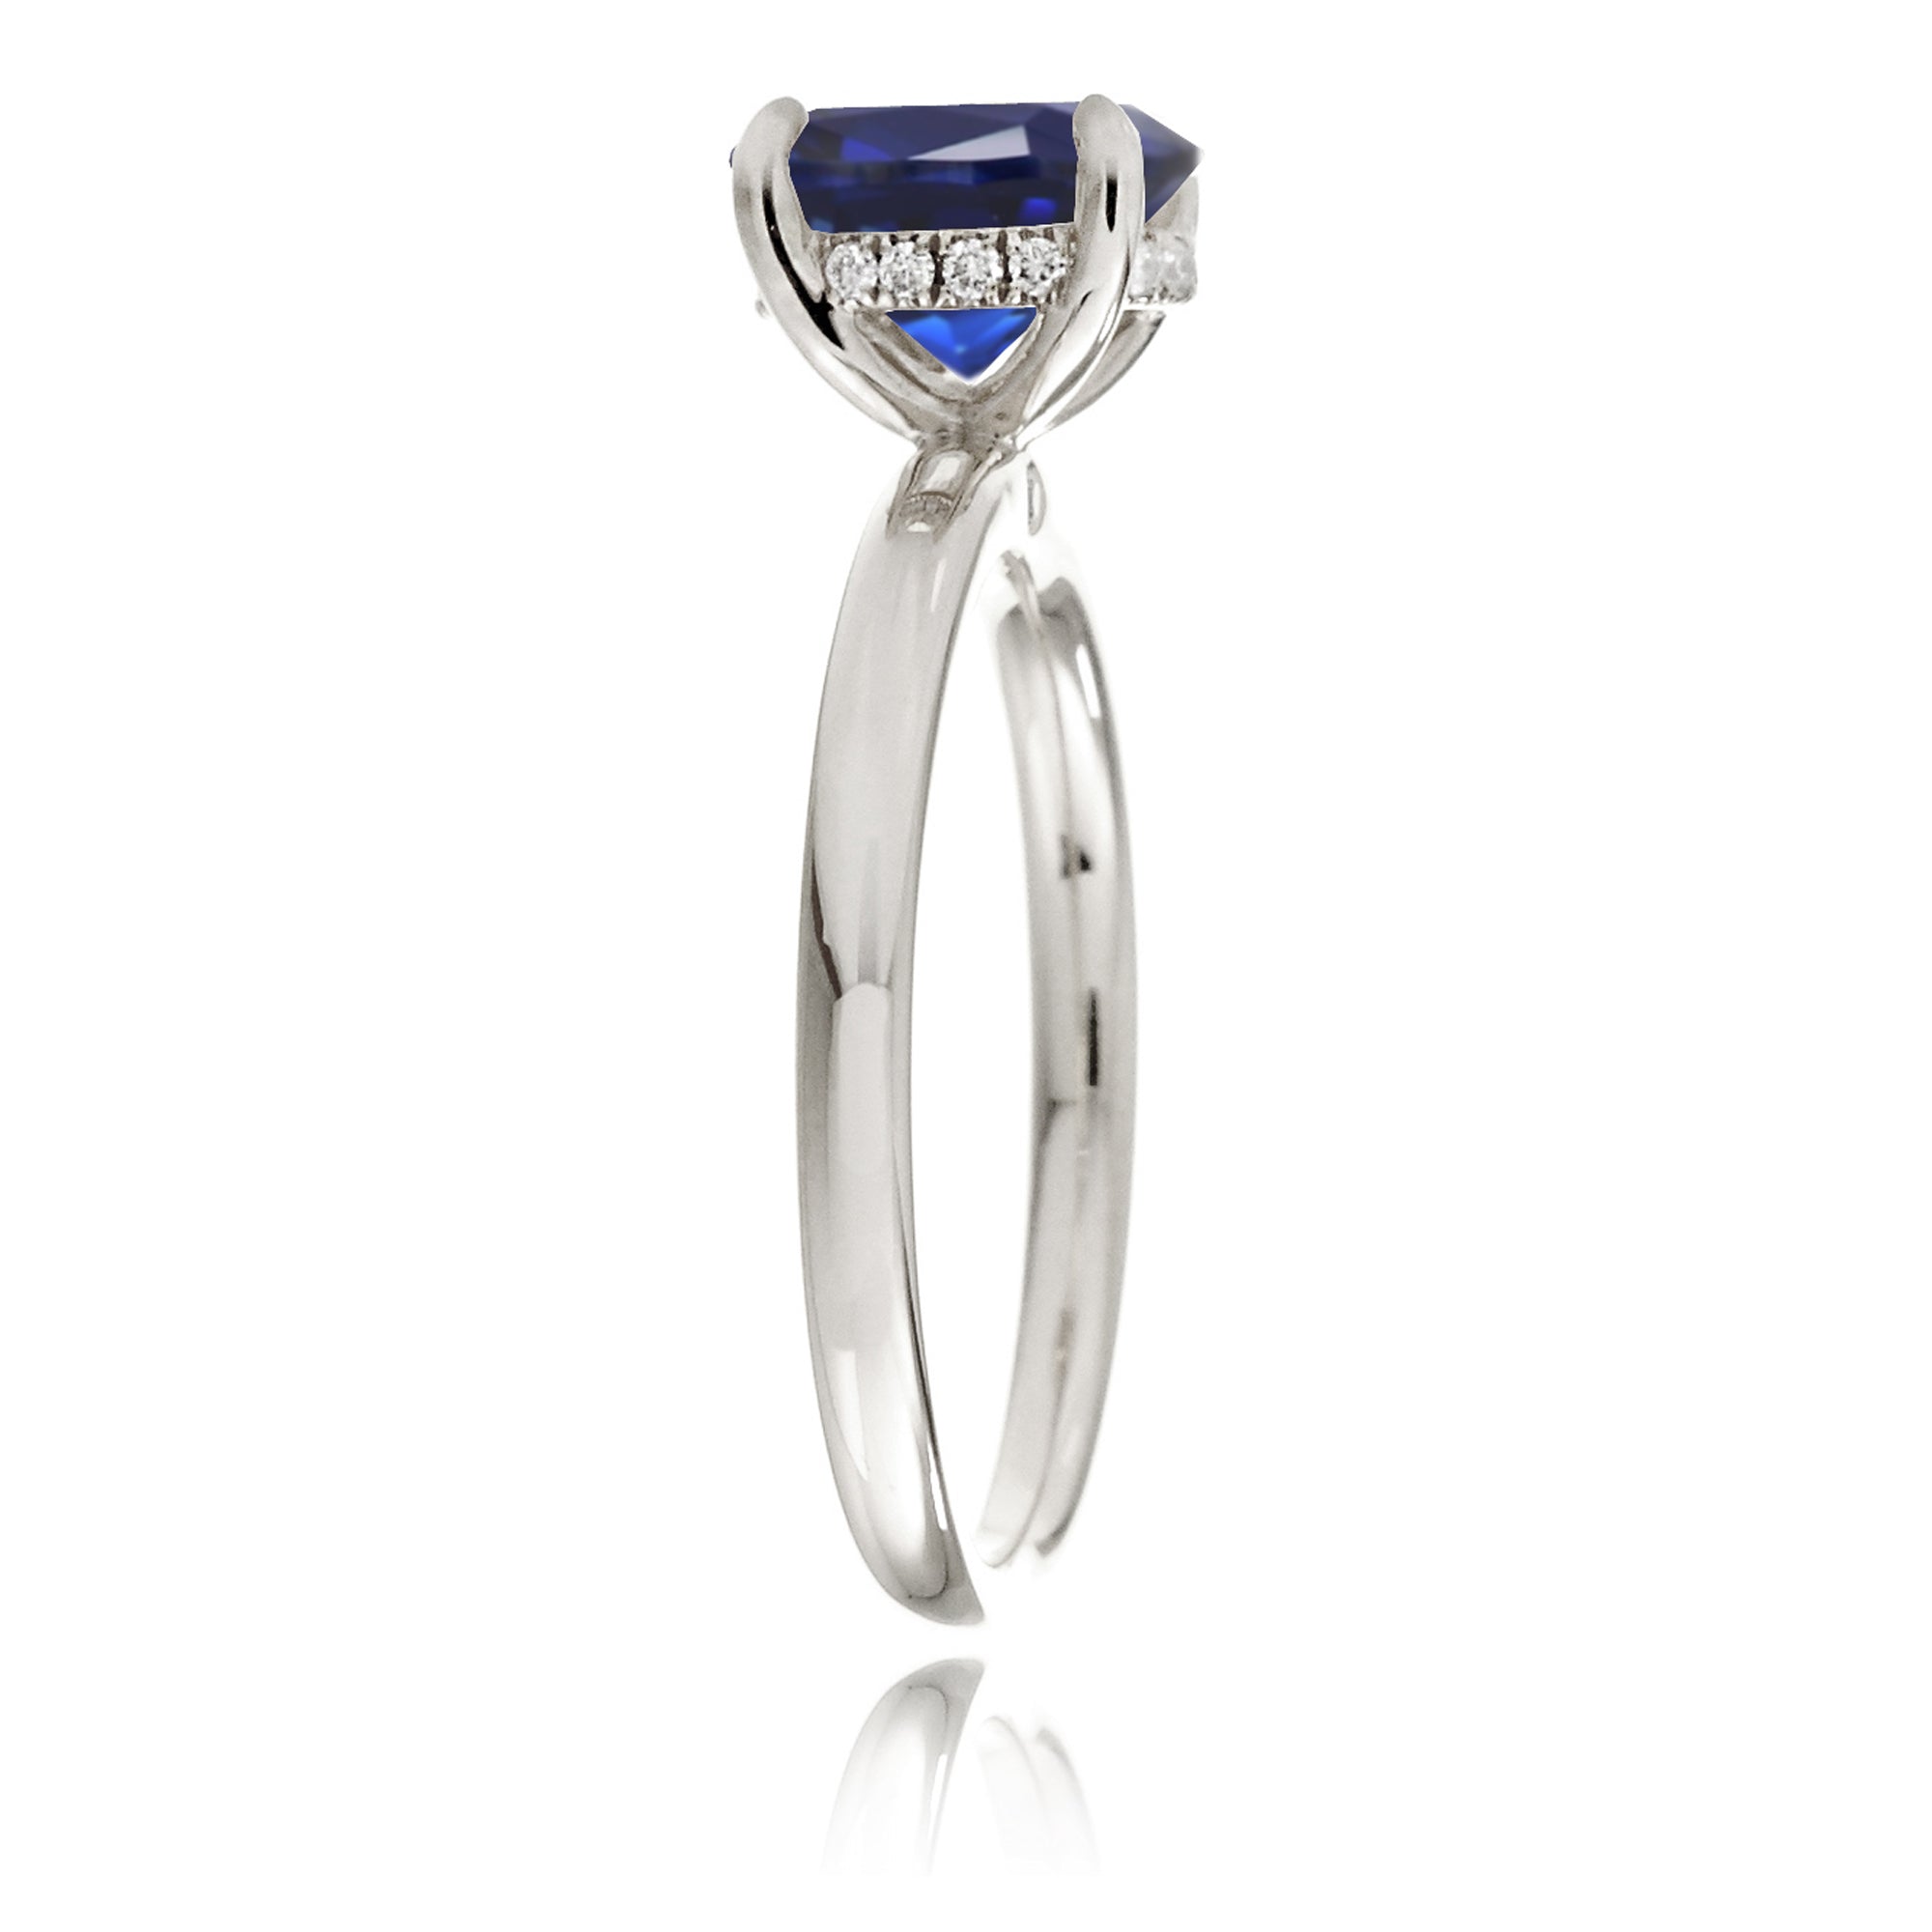 The Lucy Emerald Step Cut Sapphire Ring (Lab-Grown)